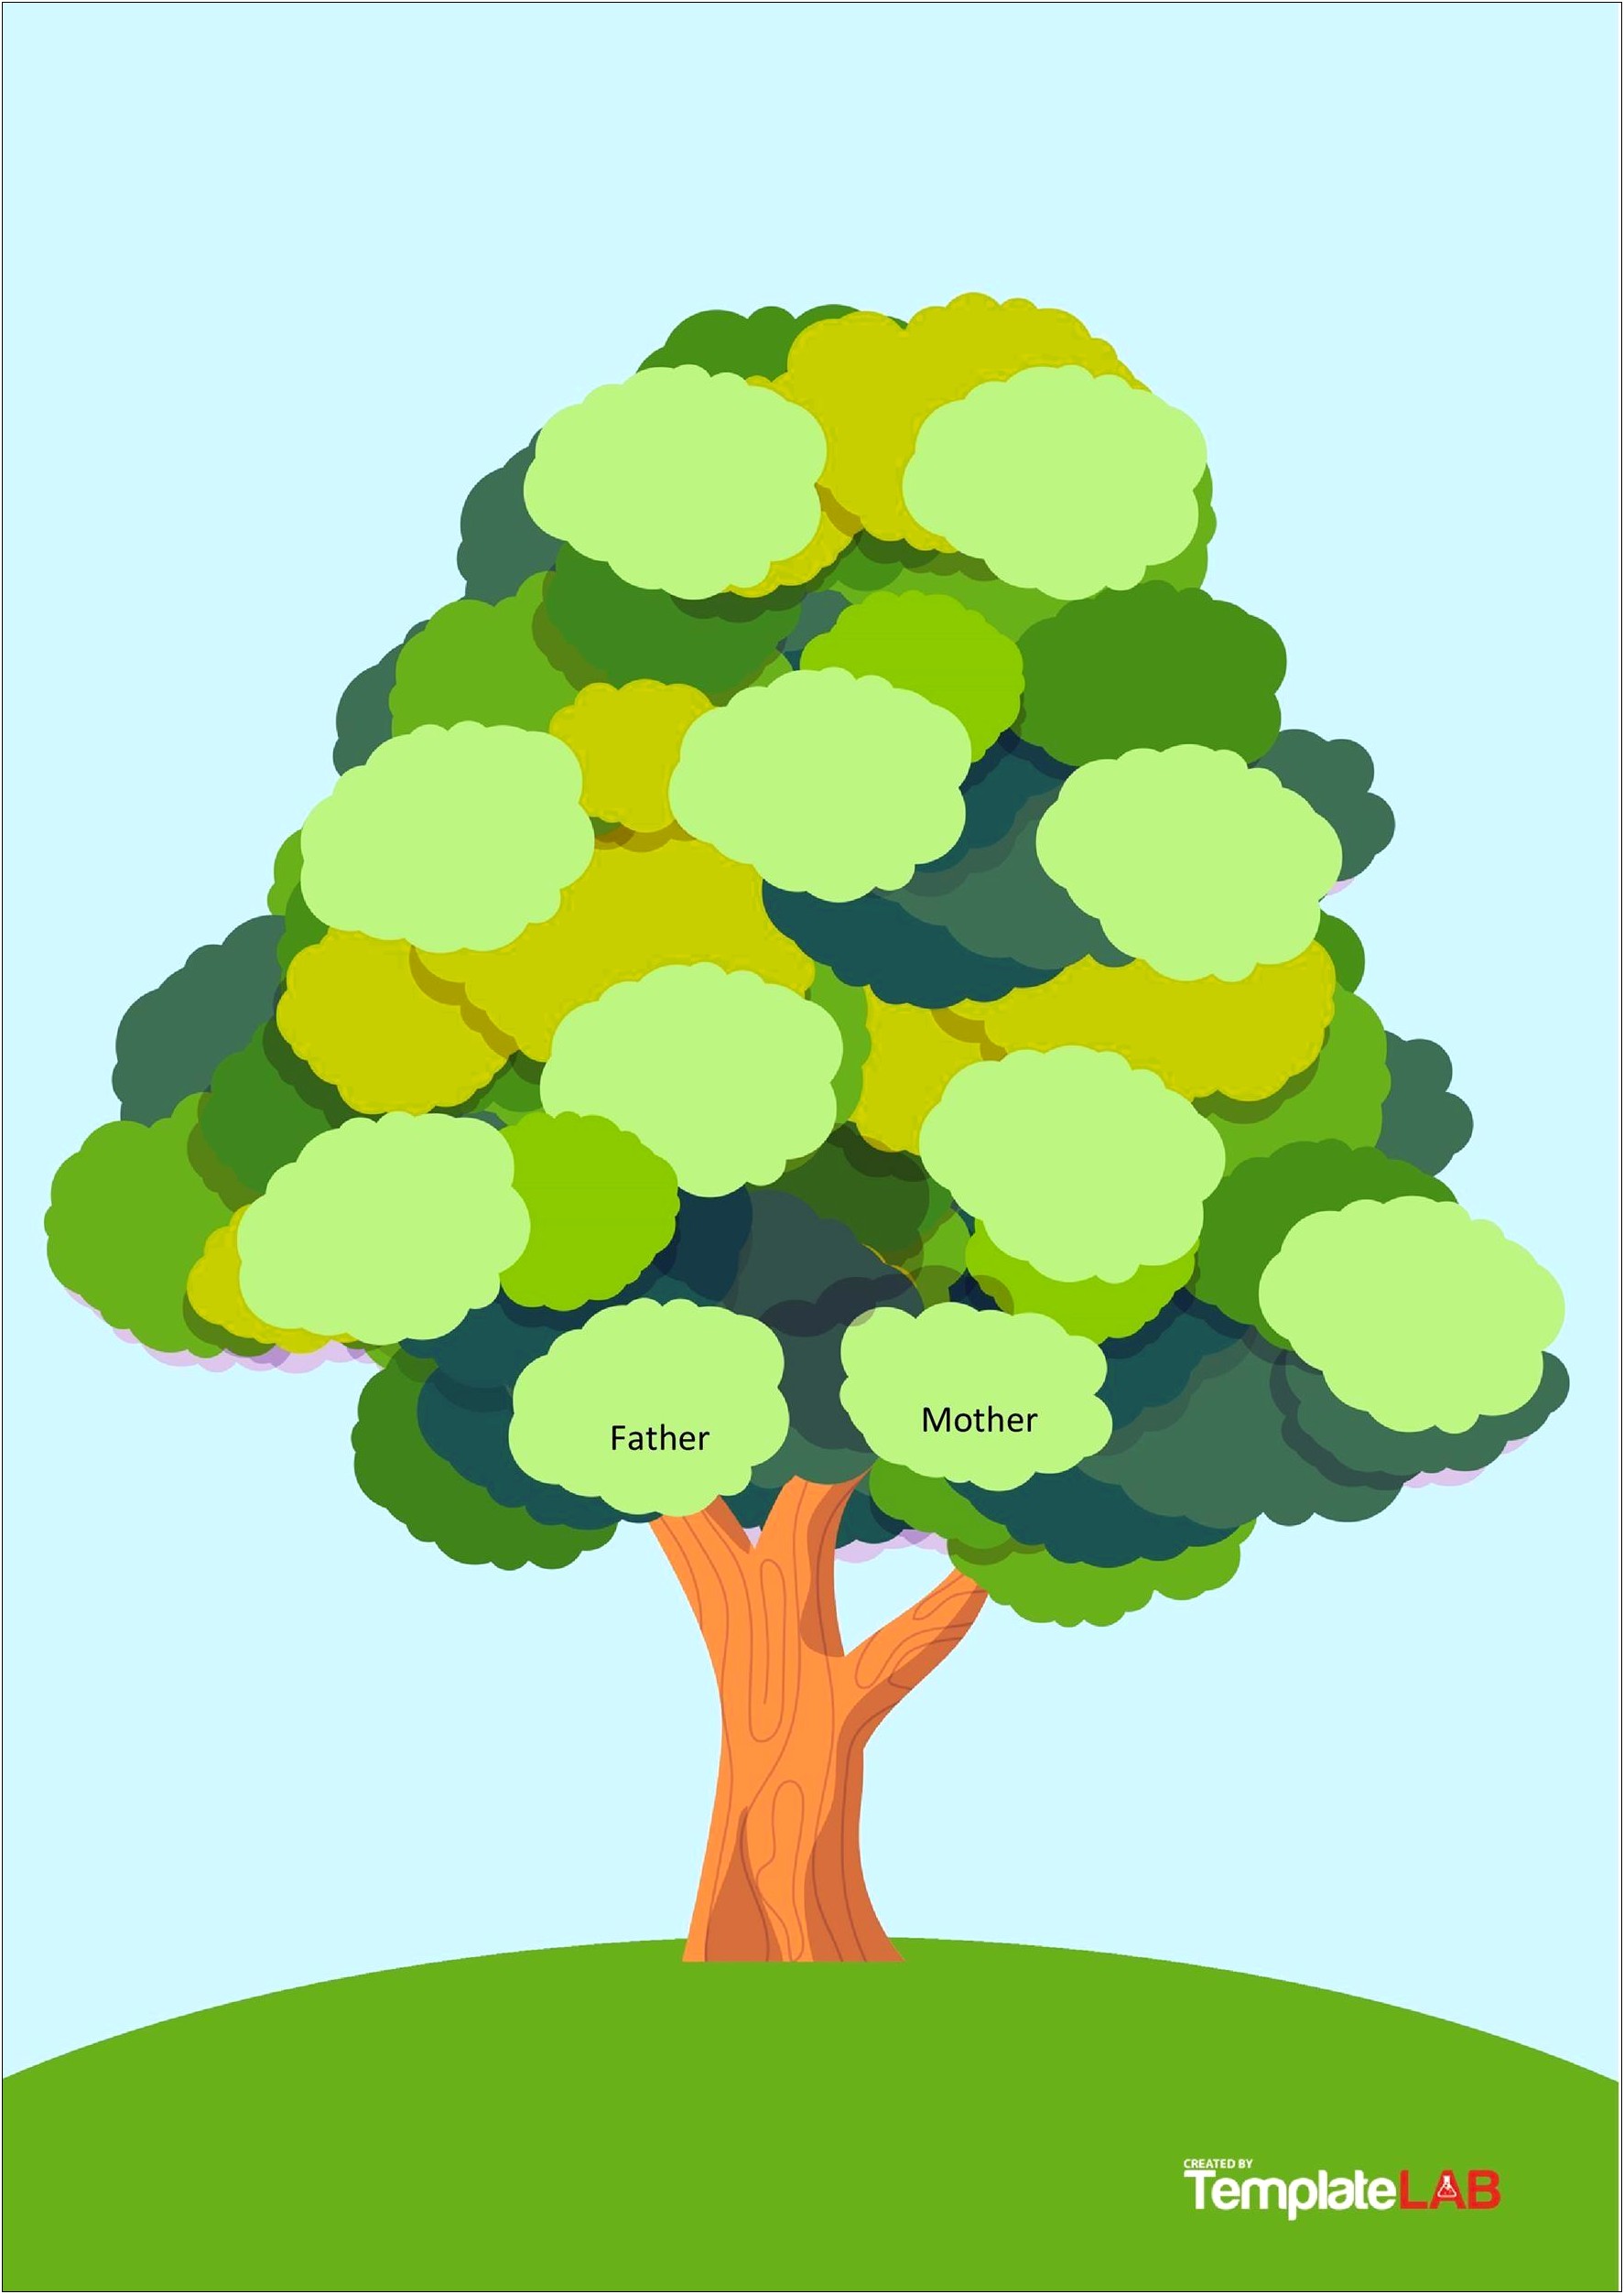 Family Tree Template For Microsoft Word 2007